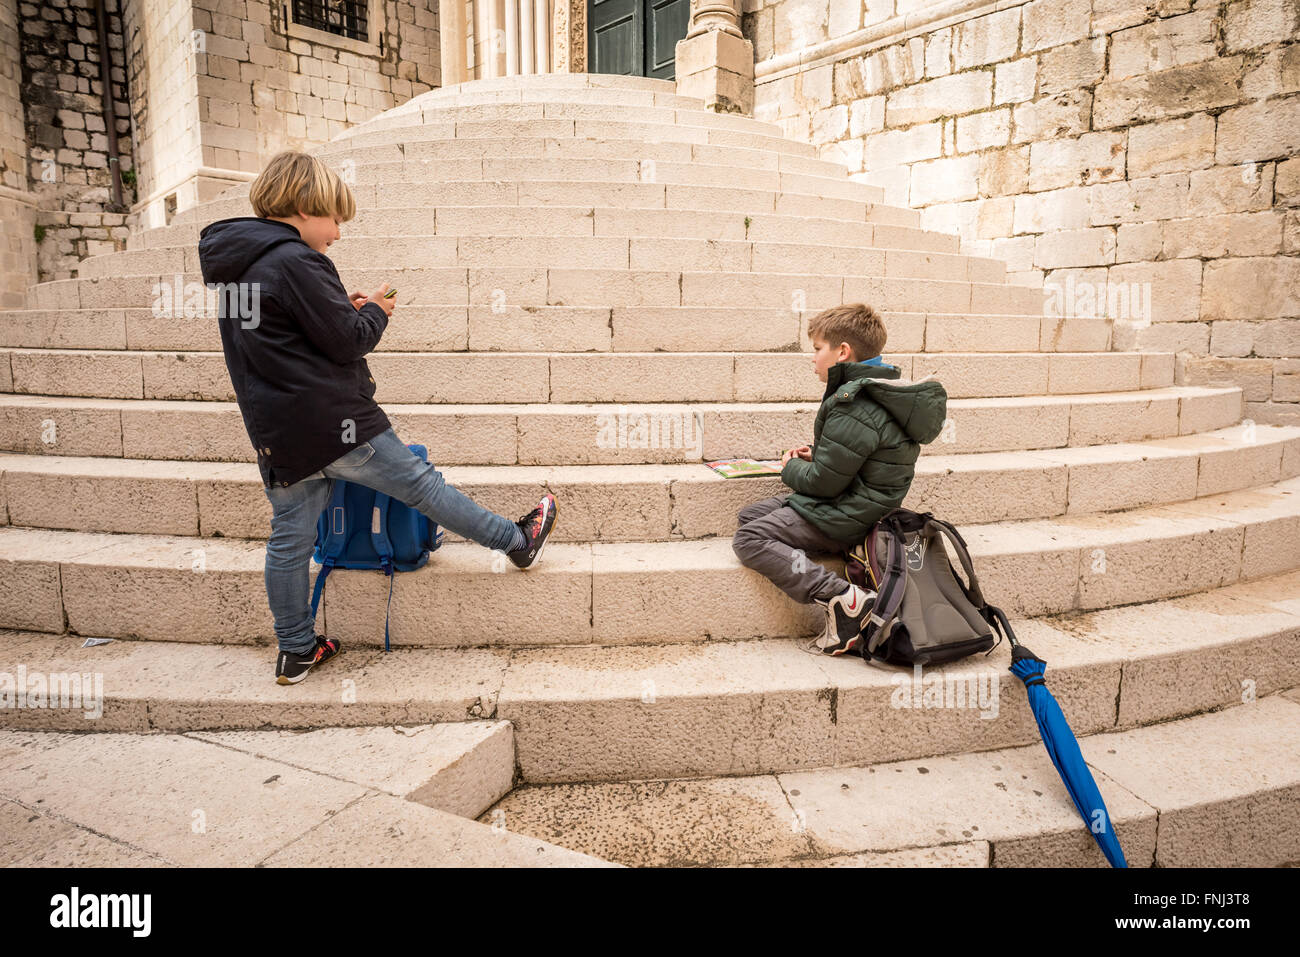 Schoolchildren playing in the old city of Dubrovnik, Croatia. Stock Photo